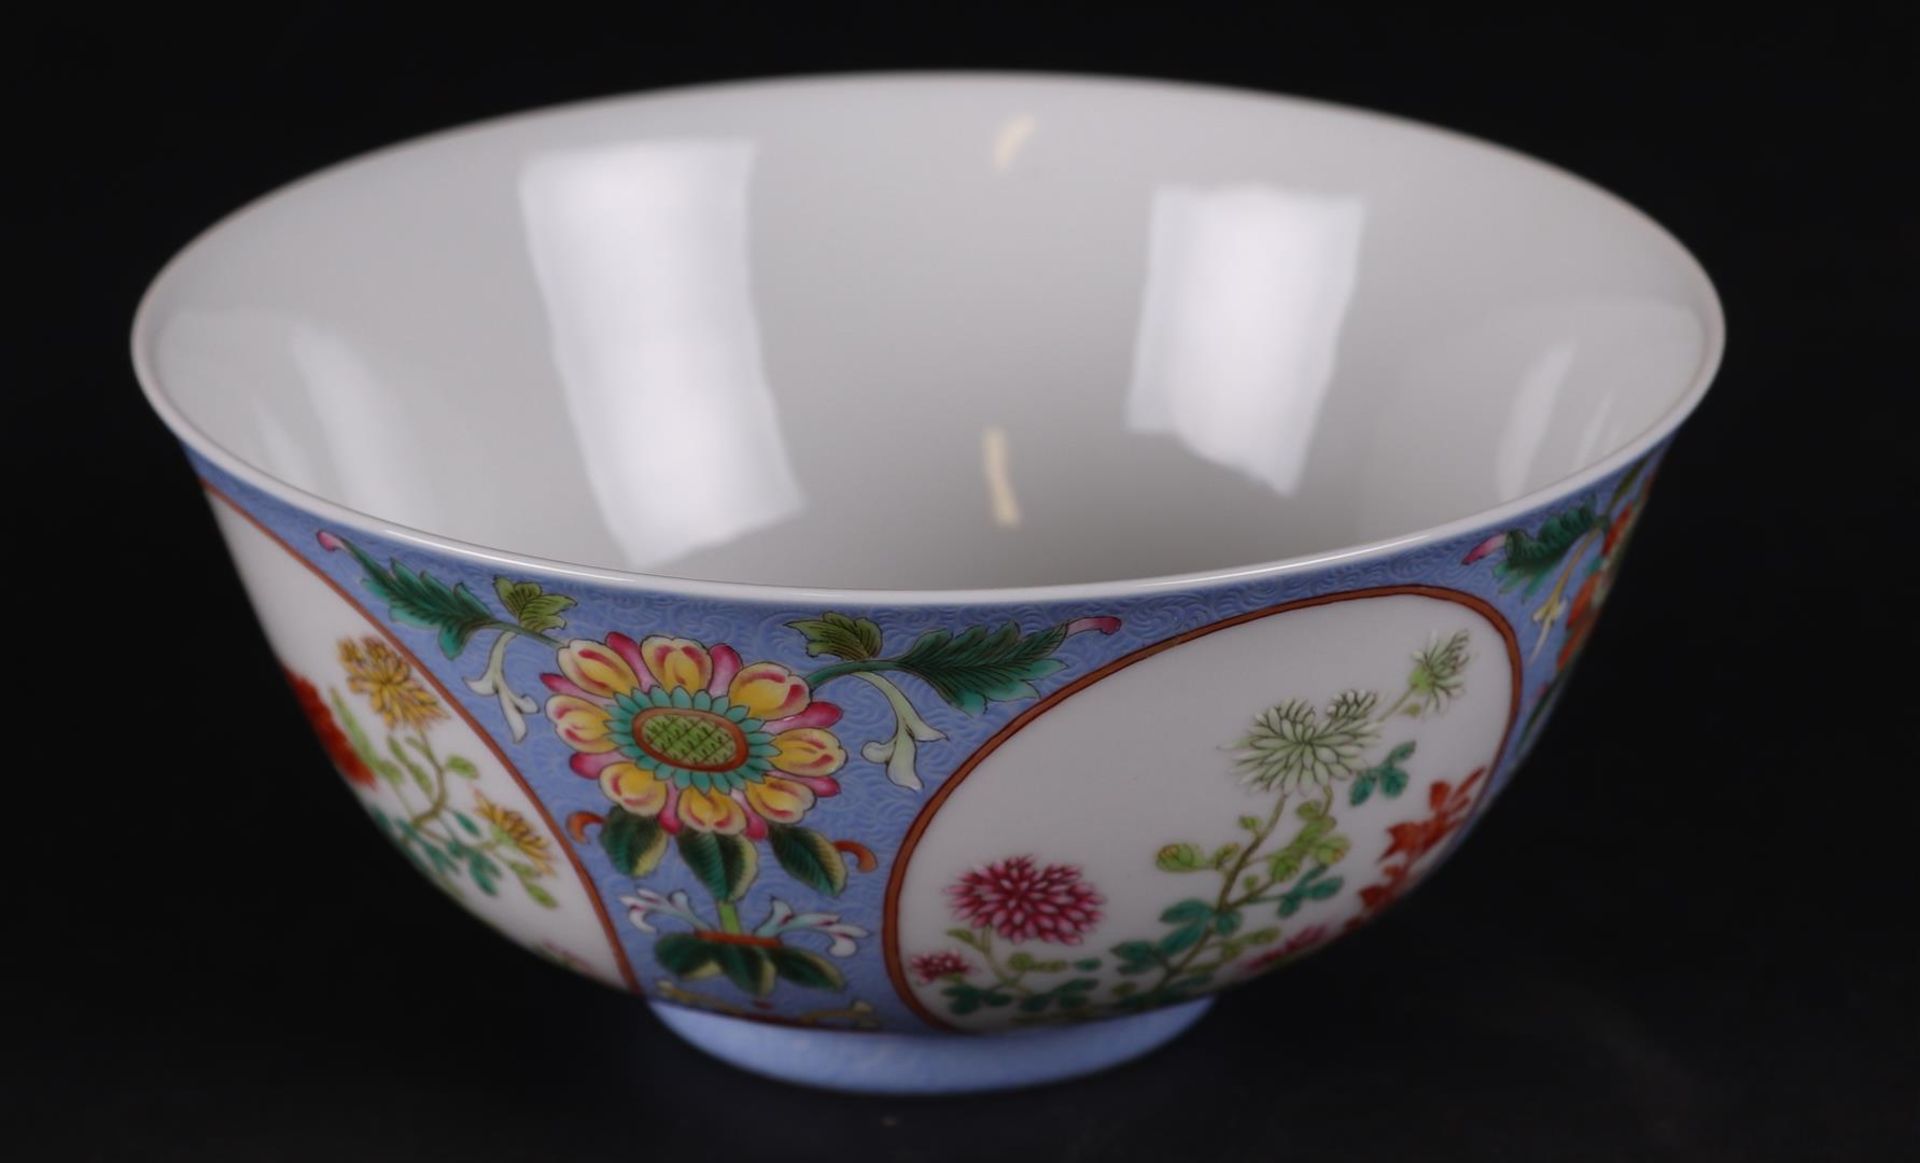 A porcelain Famile Rose bowl, marked Daoguang. China, 20th century.